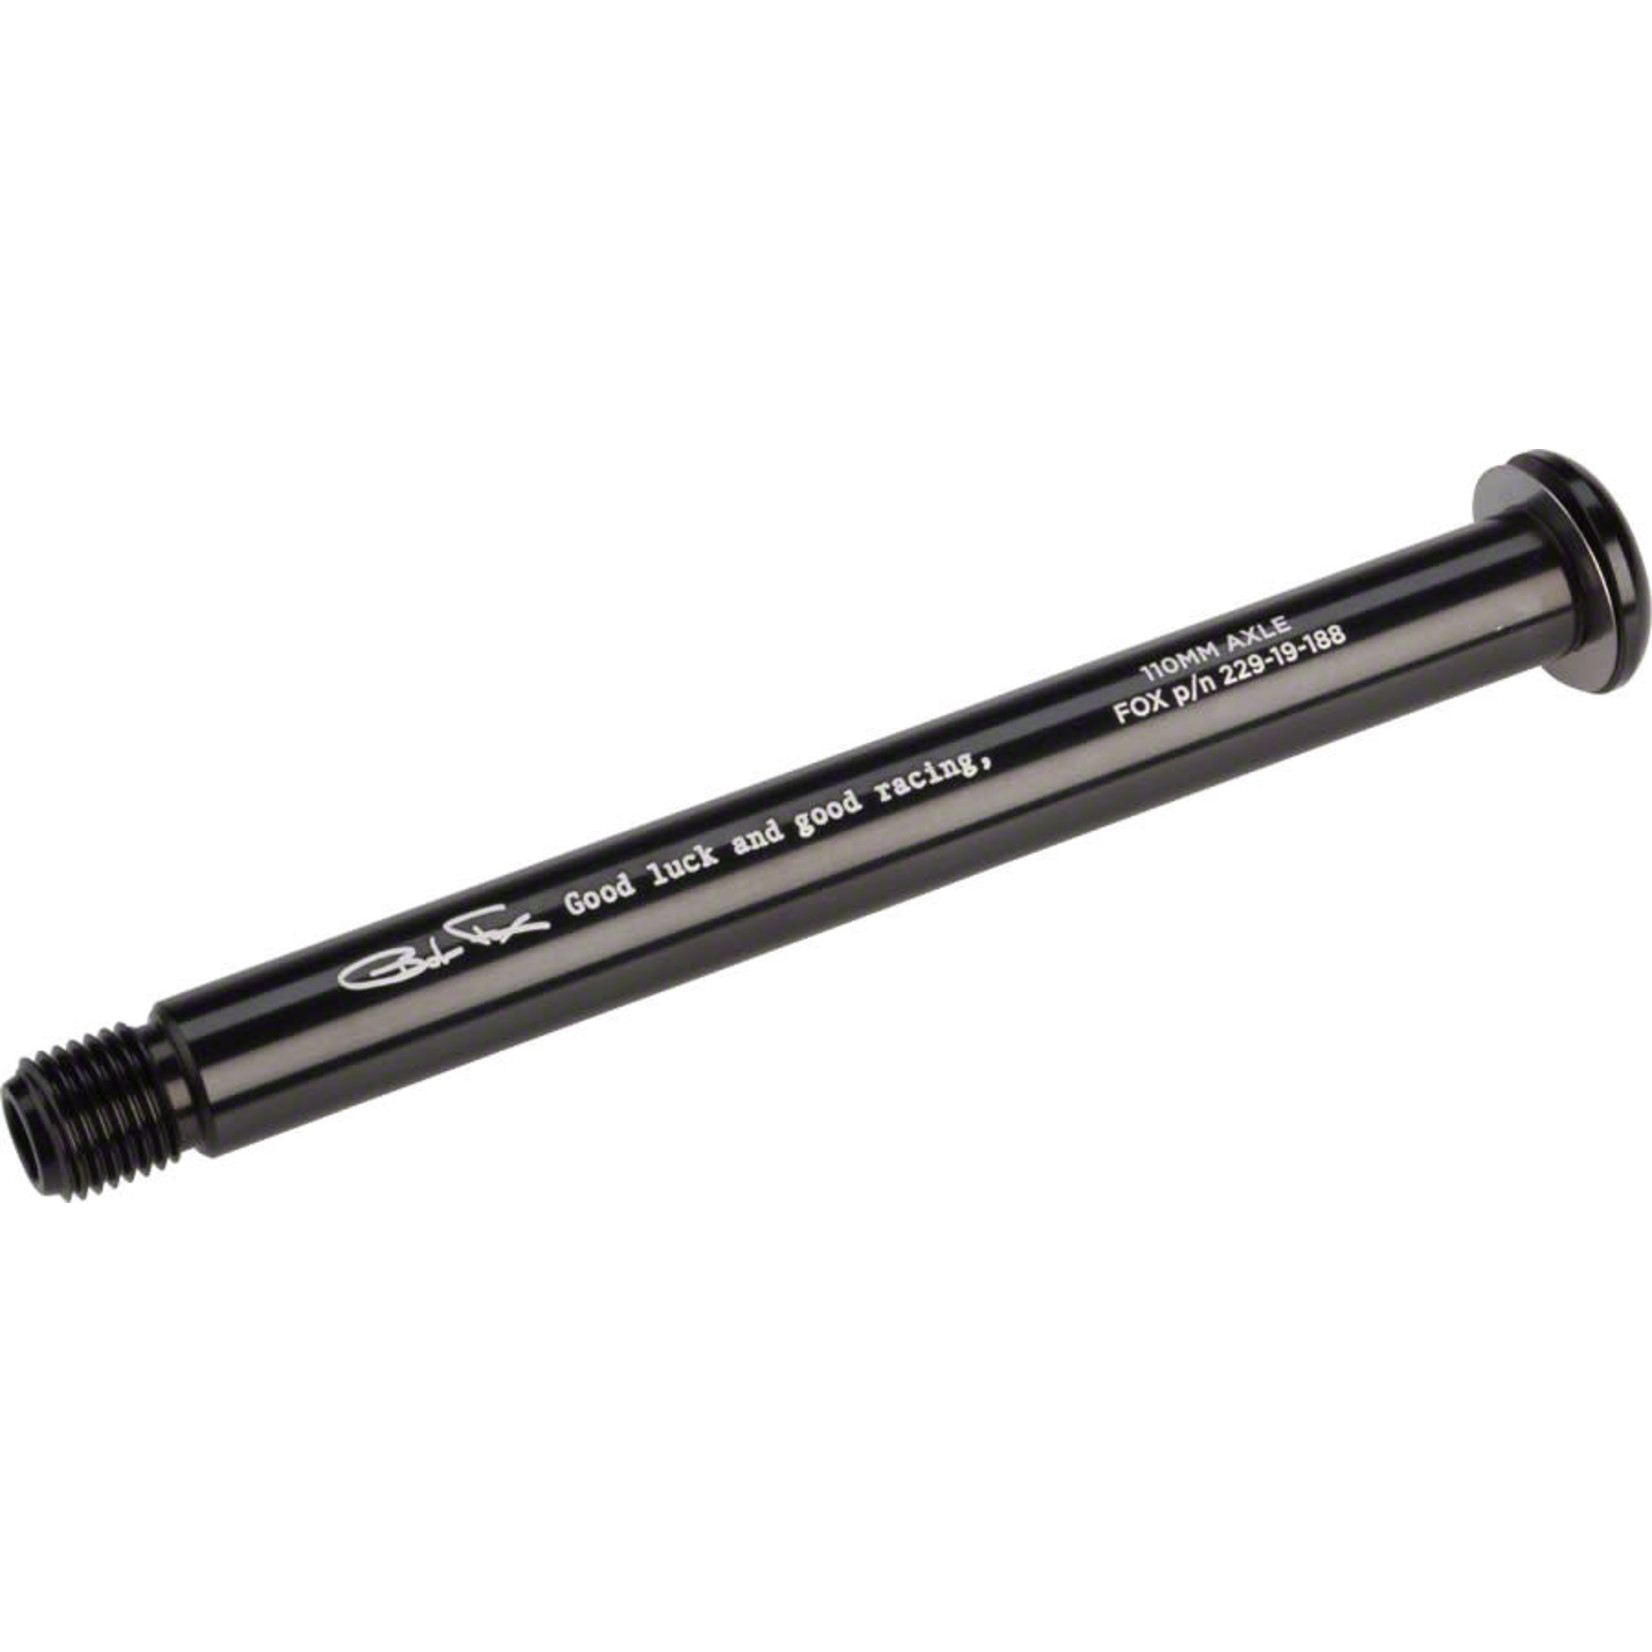 Fox FOX Kabolt Axle Assembly, Black, for 15x110mm "Boost" Forks